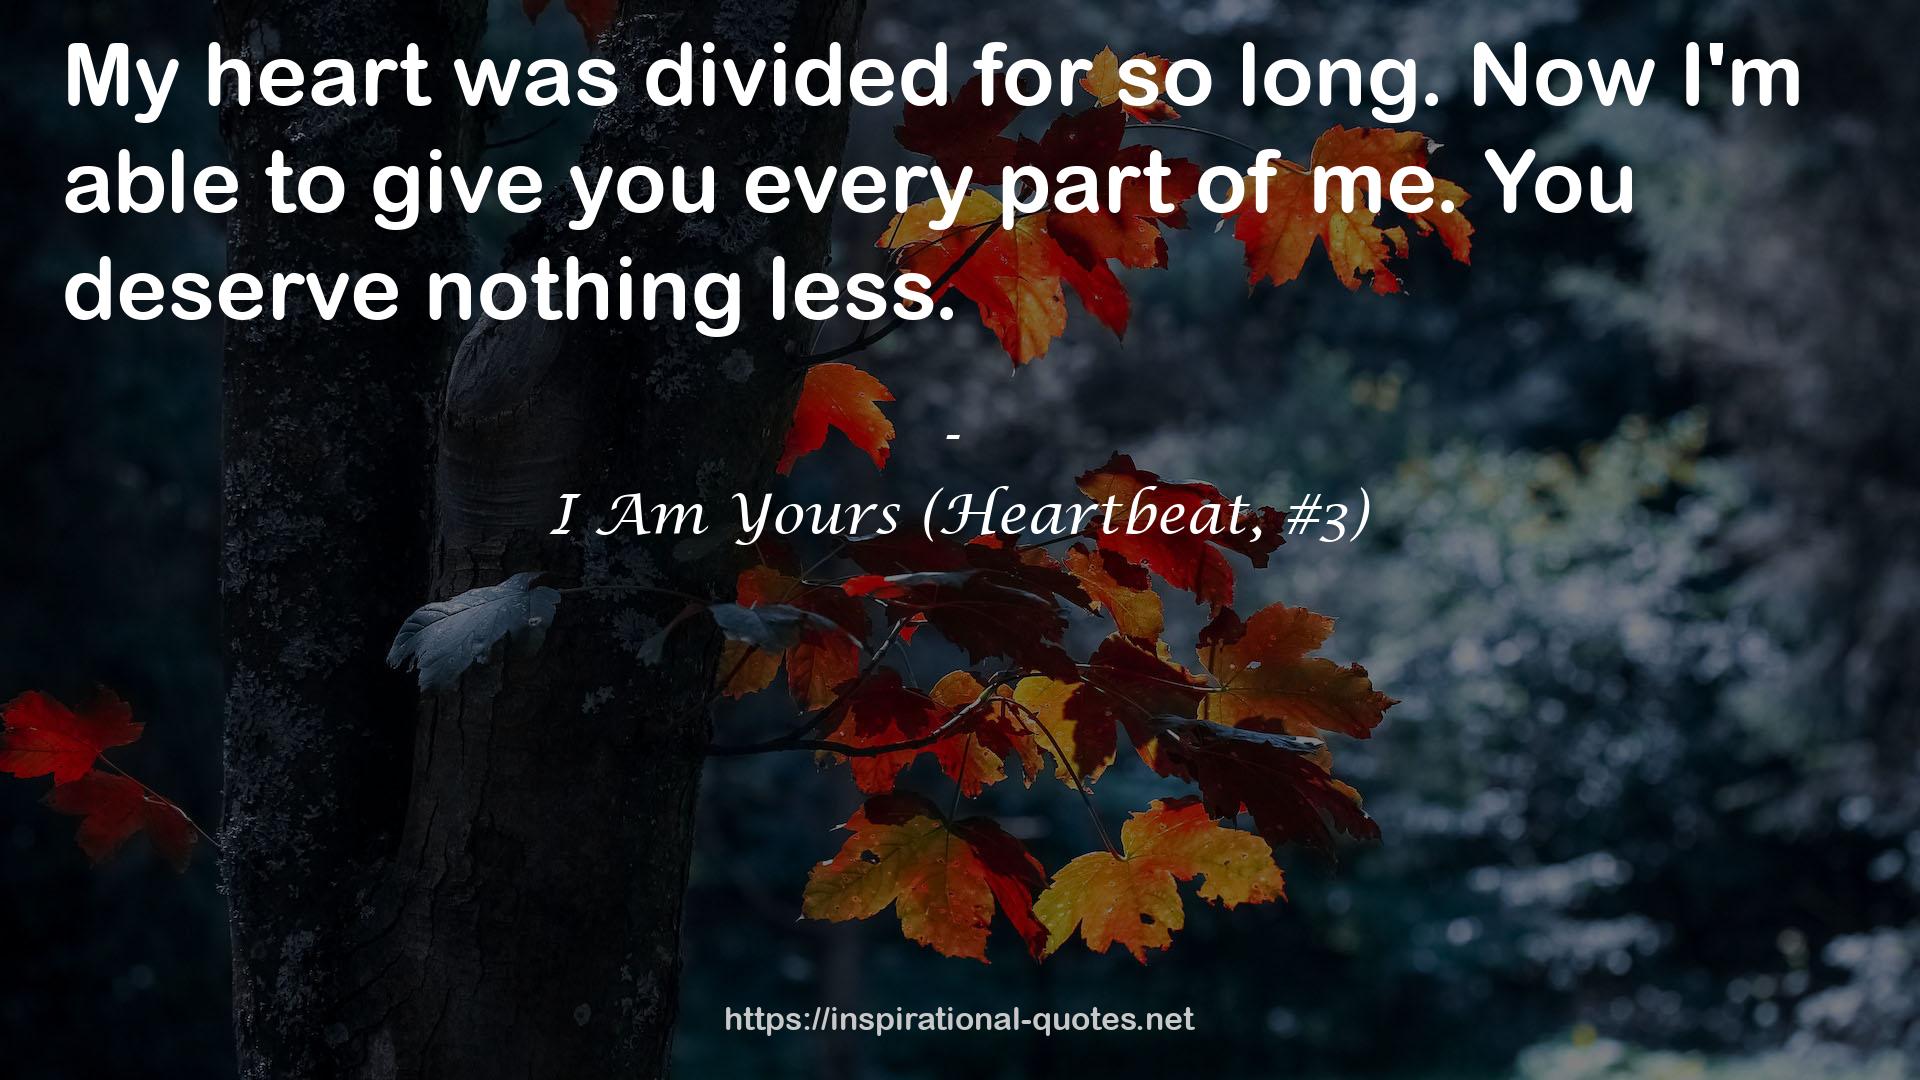 I Am Yours (Heartbeat, #3) QUOTES